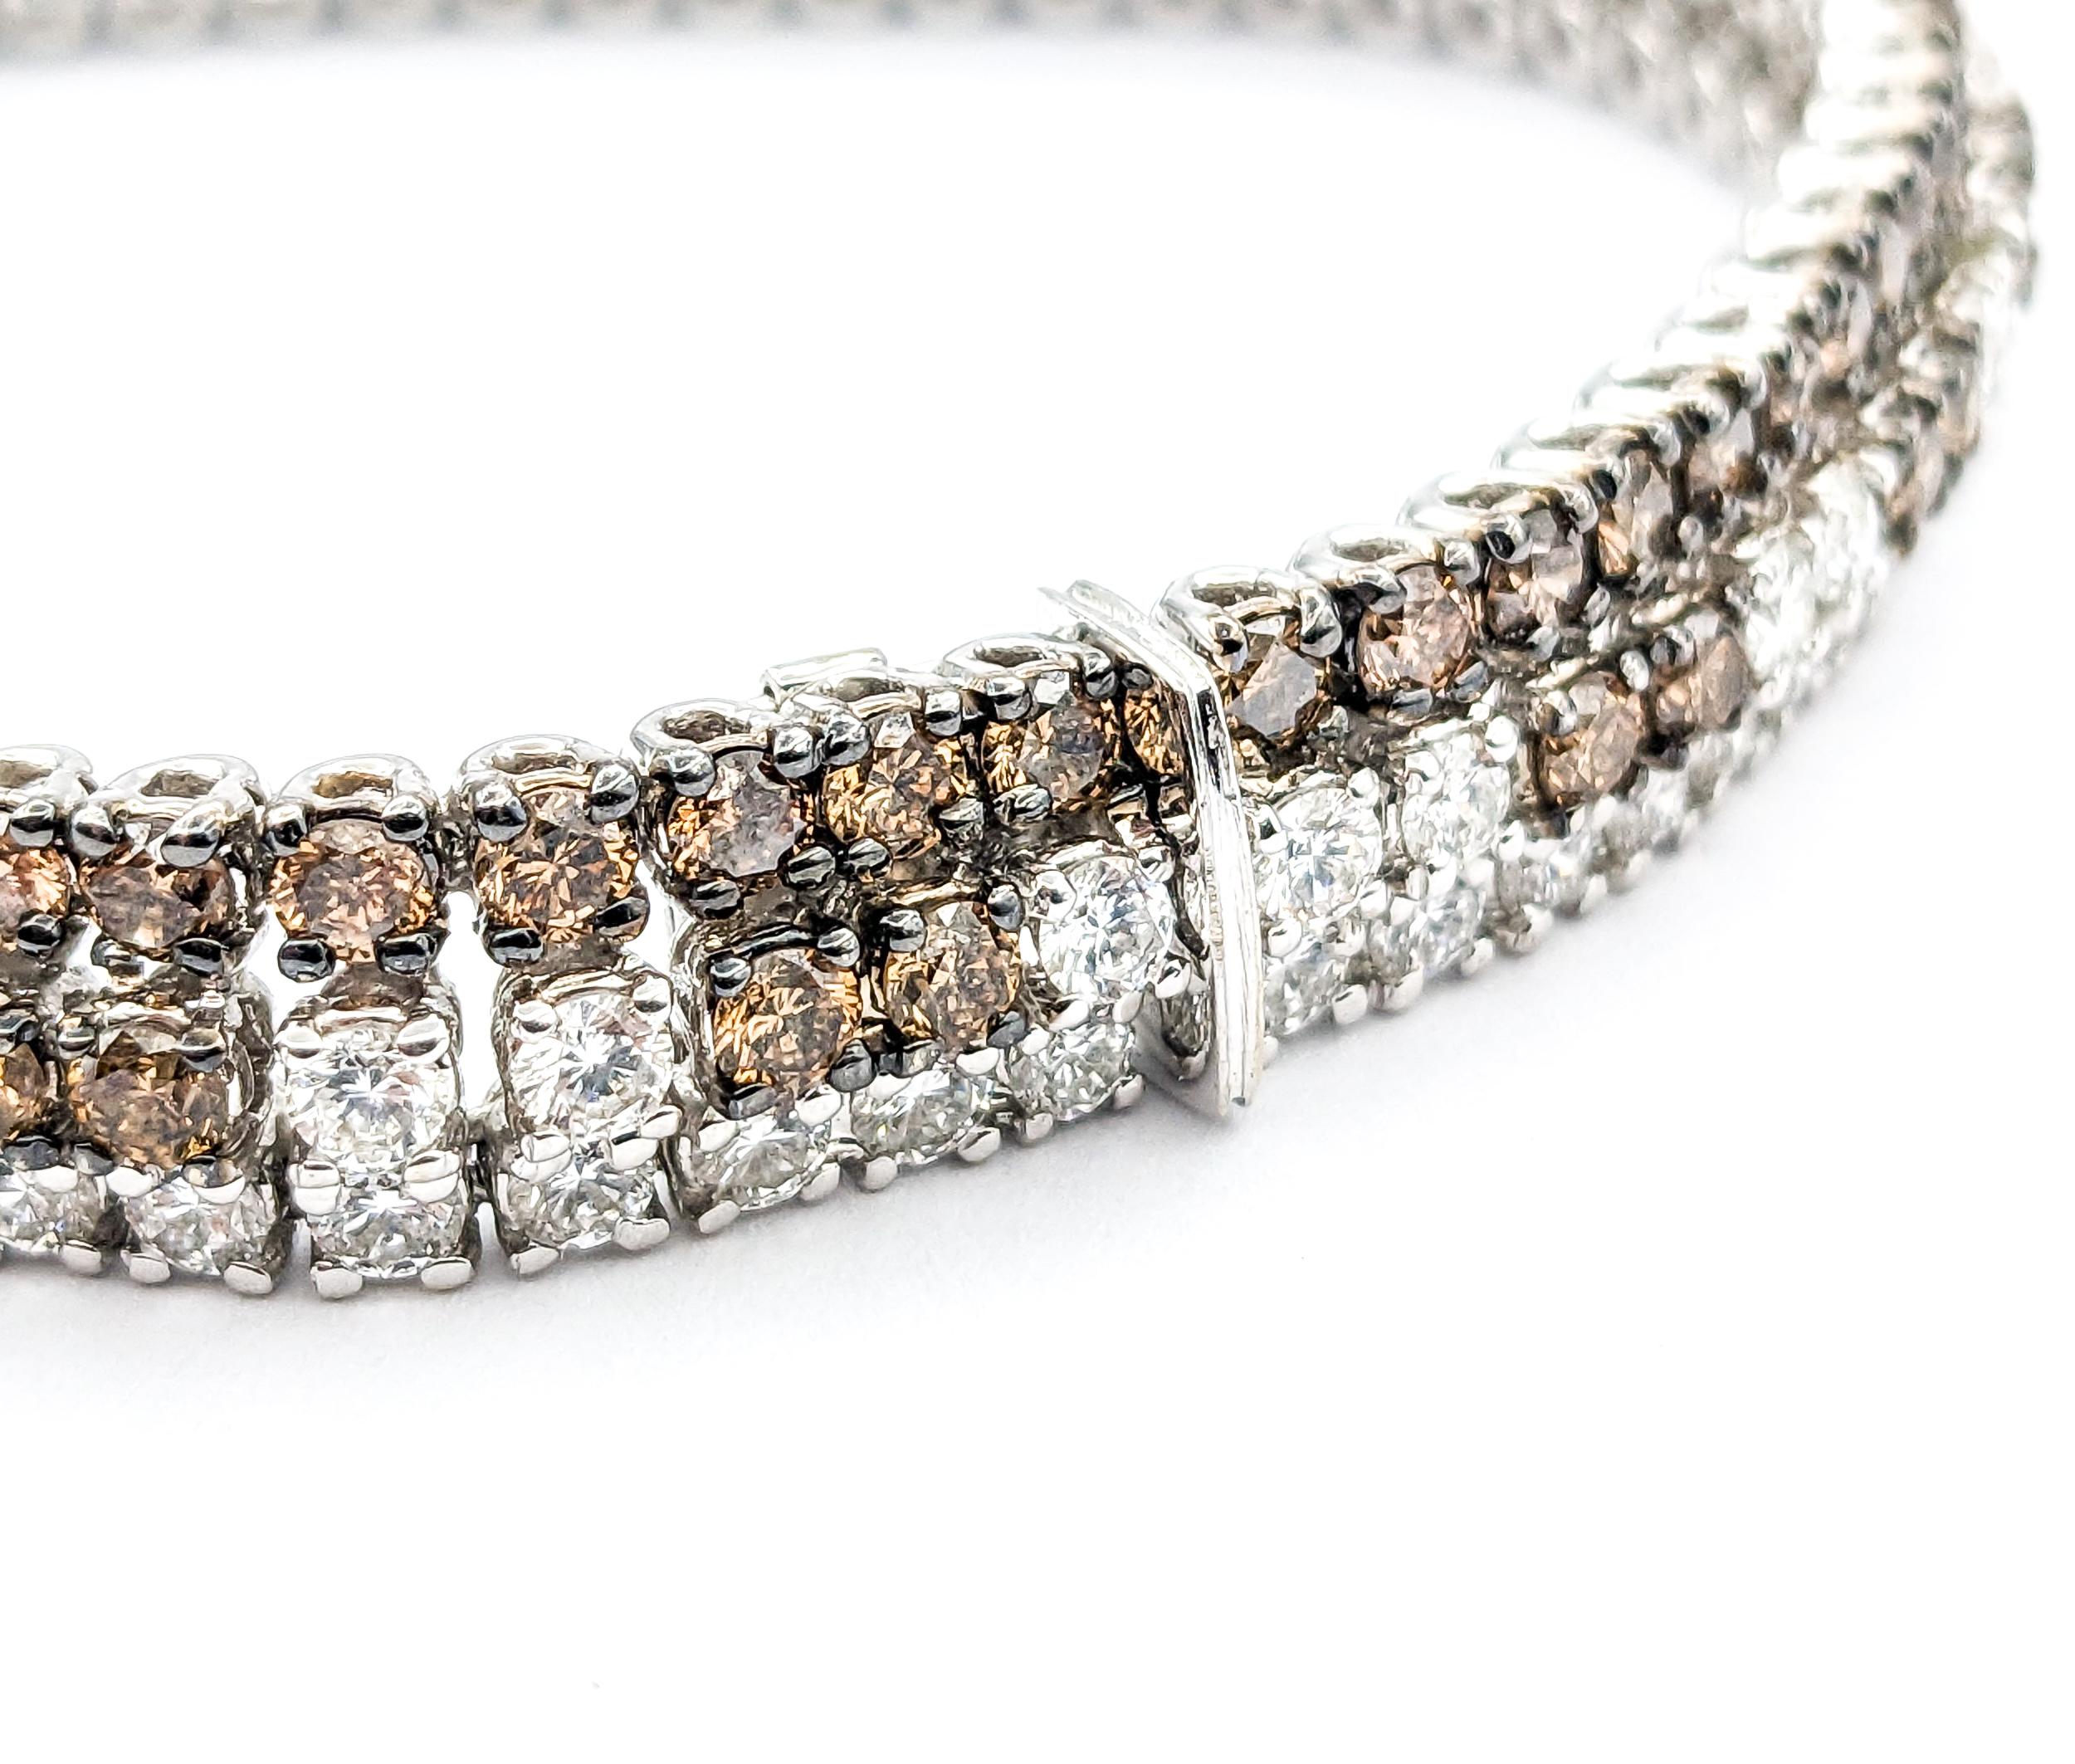 11.85ctw Diamond Crivelli 3 Line Bi-Color Bracelet In White Gold

This magnificent Crivelli Bracelet 3 Line Bi-Color is a luxurious piece crafted in 18kt white gold, showcasing a stunning array of round diamonds totaling 11.85 carats. The diamonds